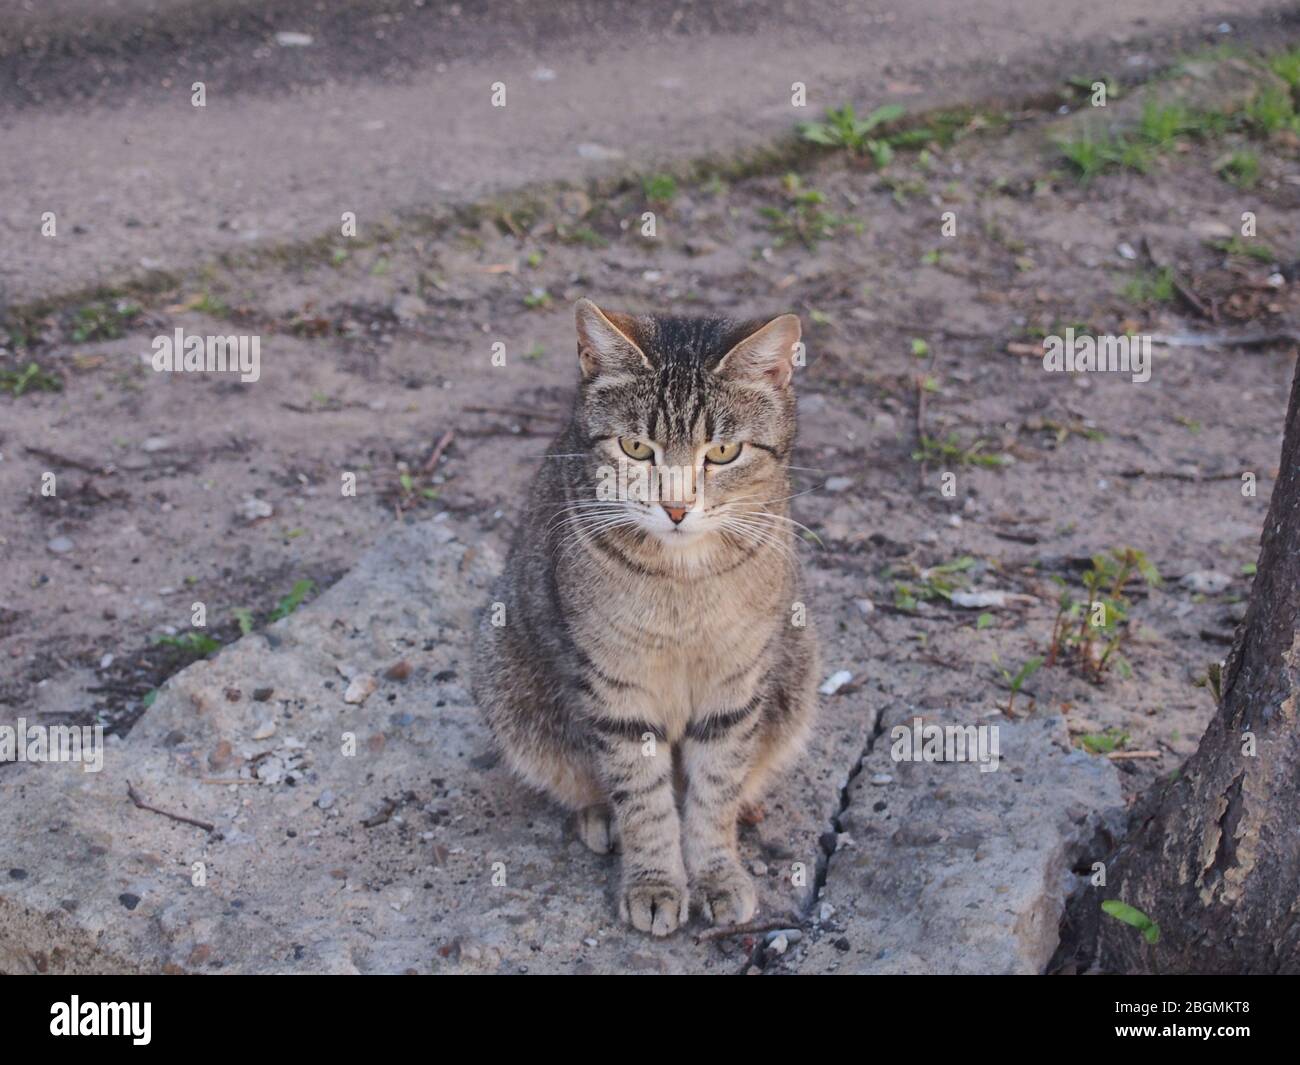 A Grey Tabby Cat Is Sitting On The Ground Close Up Stock Photo Alamy